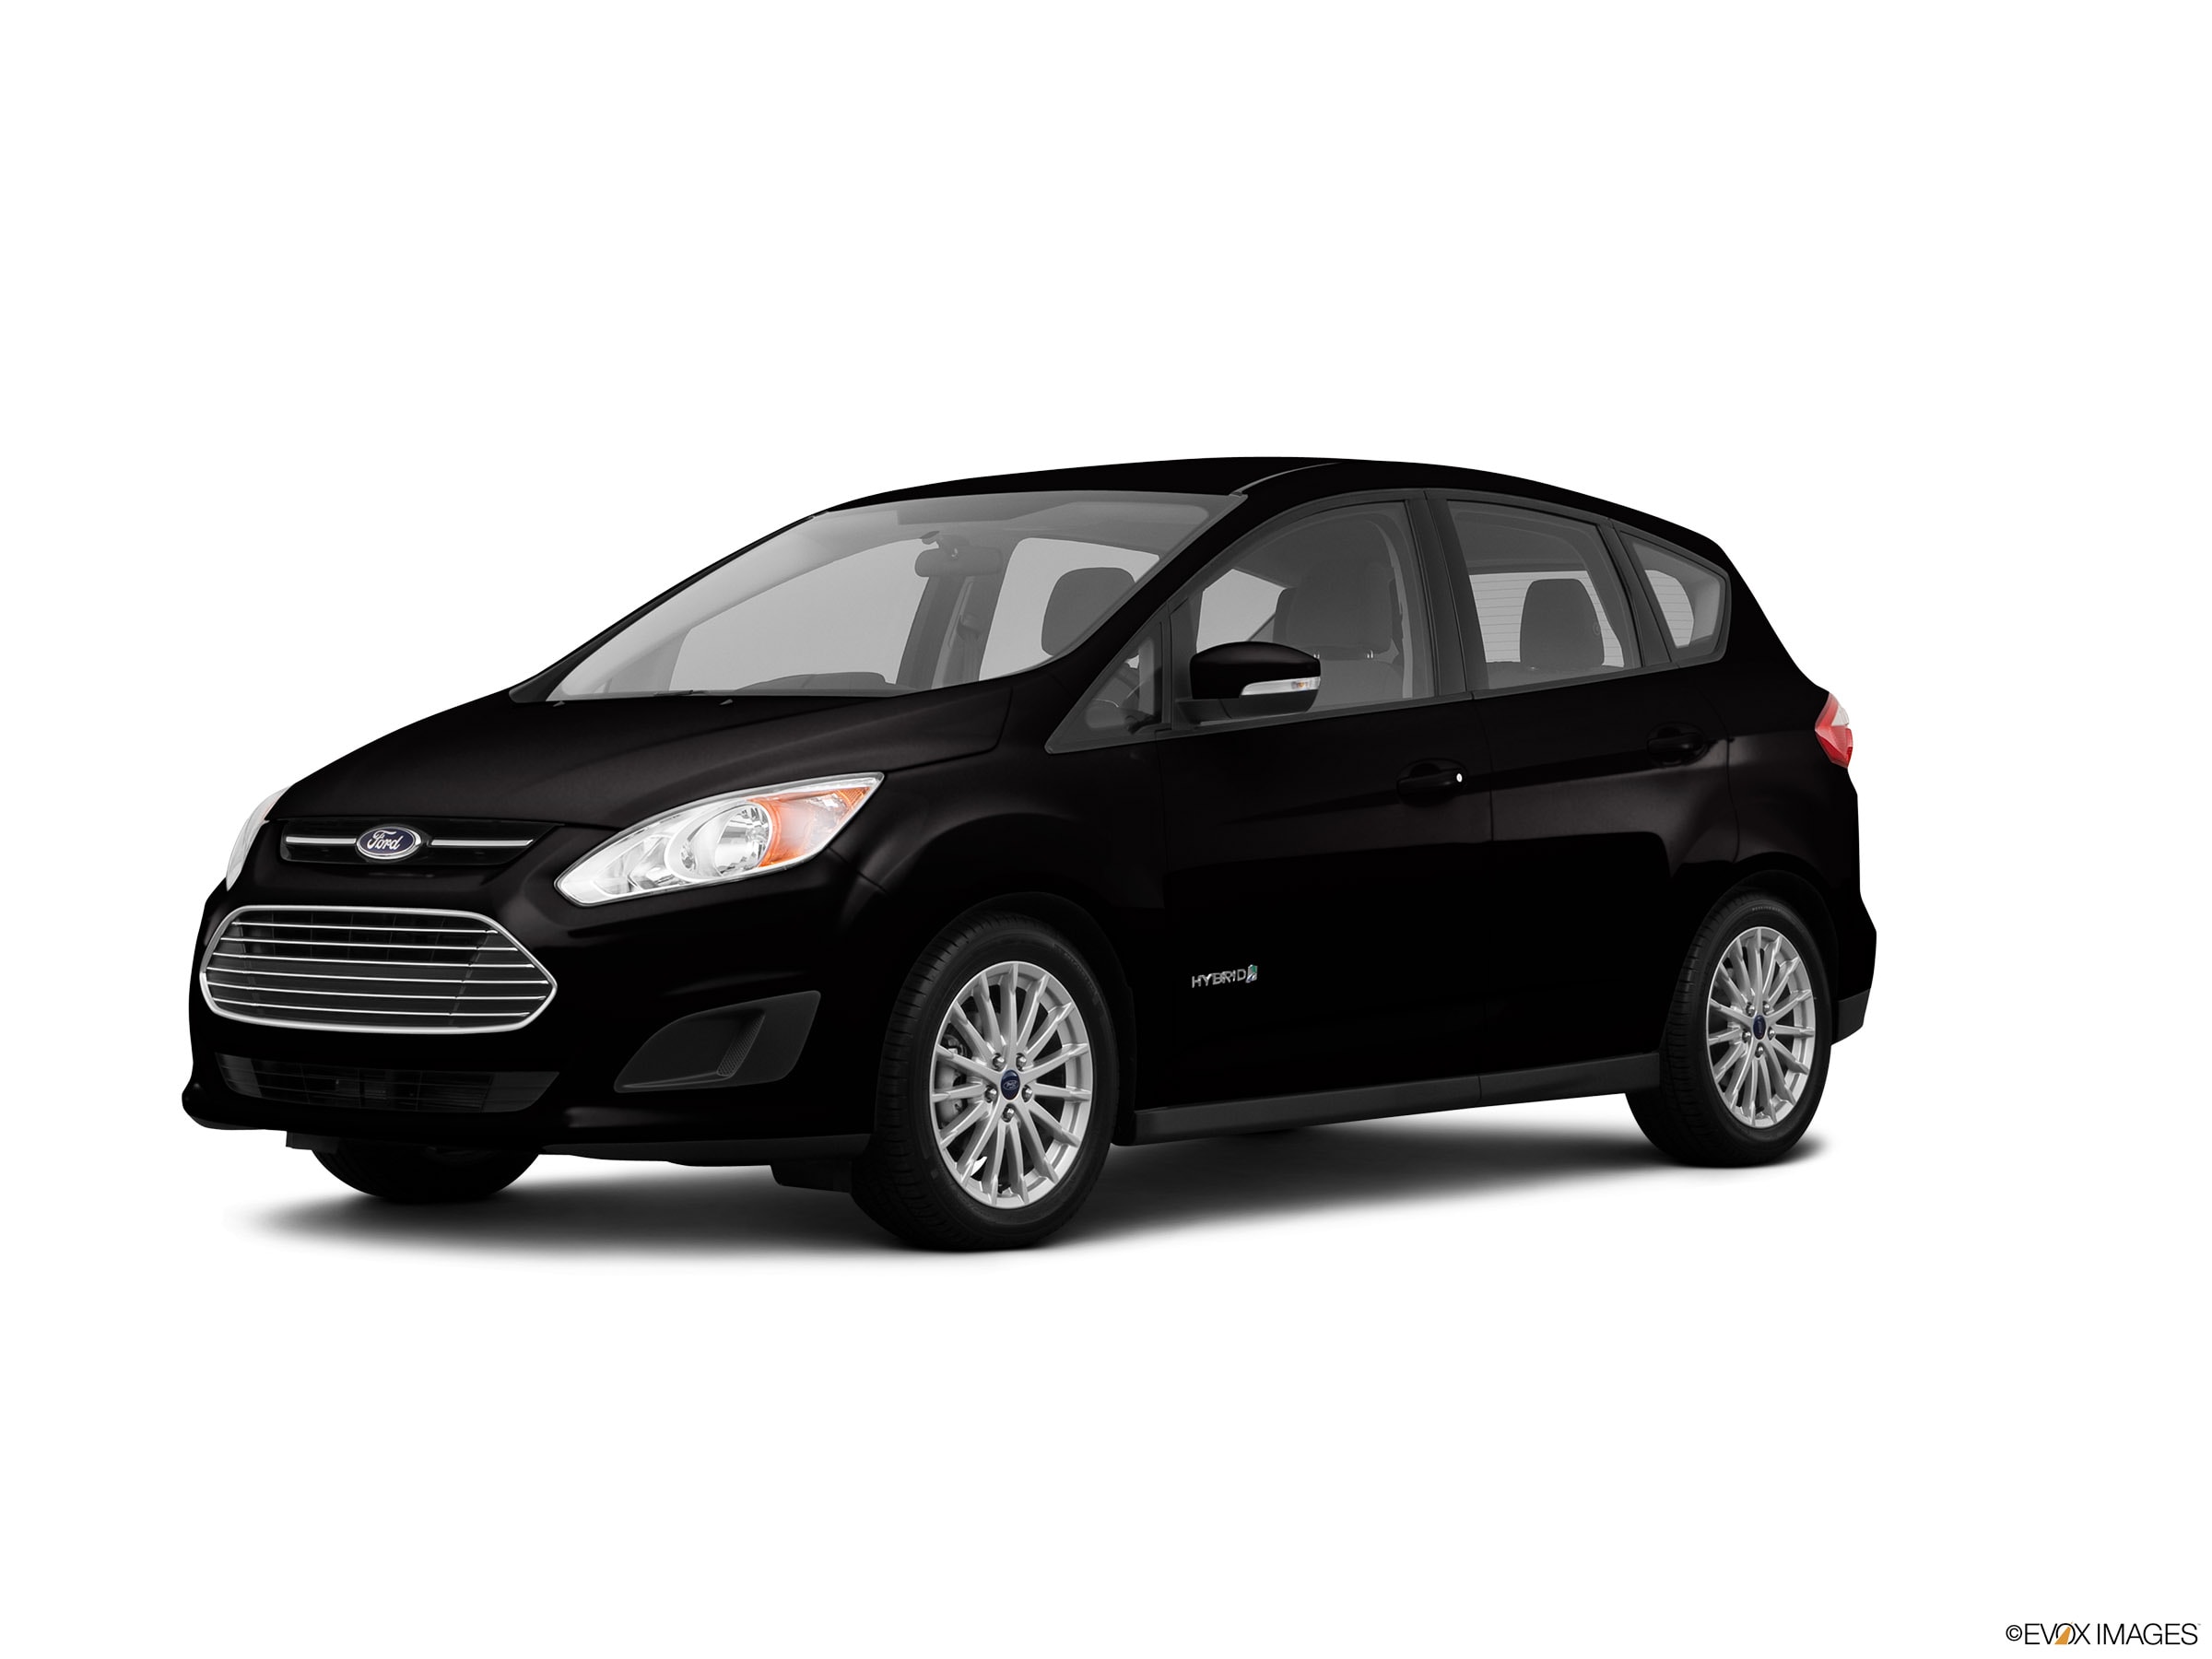 Used 2013 Ford C-Max Hybrid For Sale at Perry Ford San Luis Obispo | VIN:  1FADP5AU1DL502232